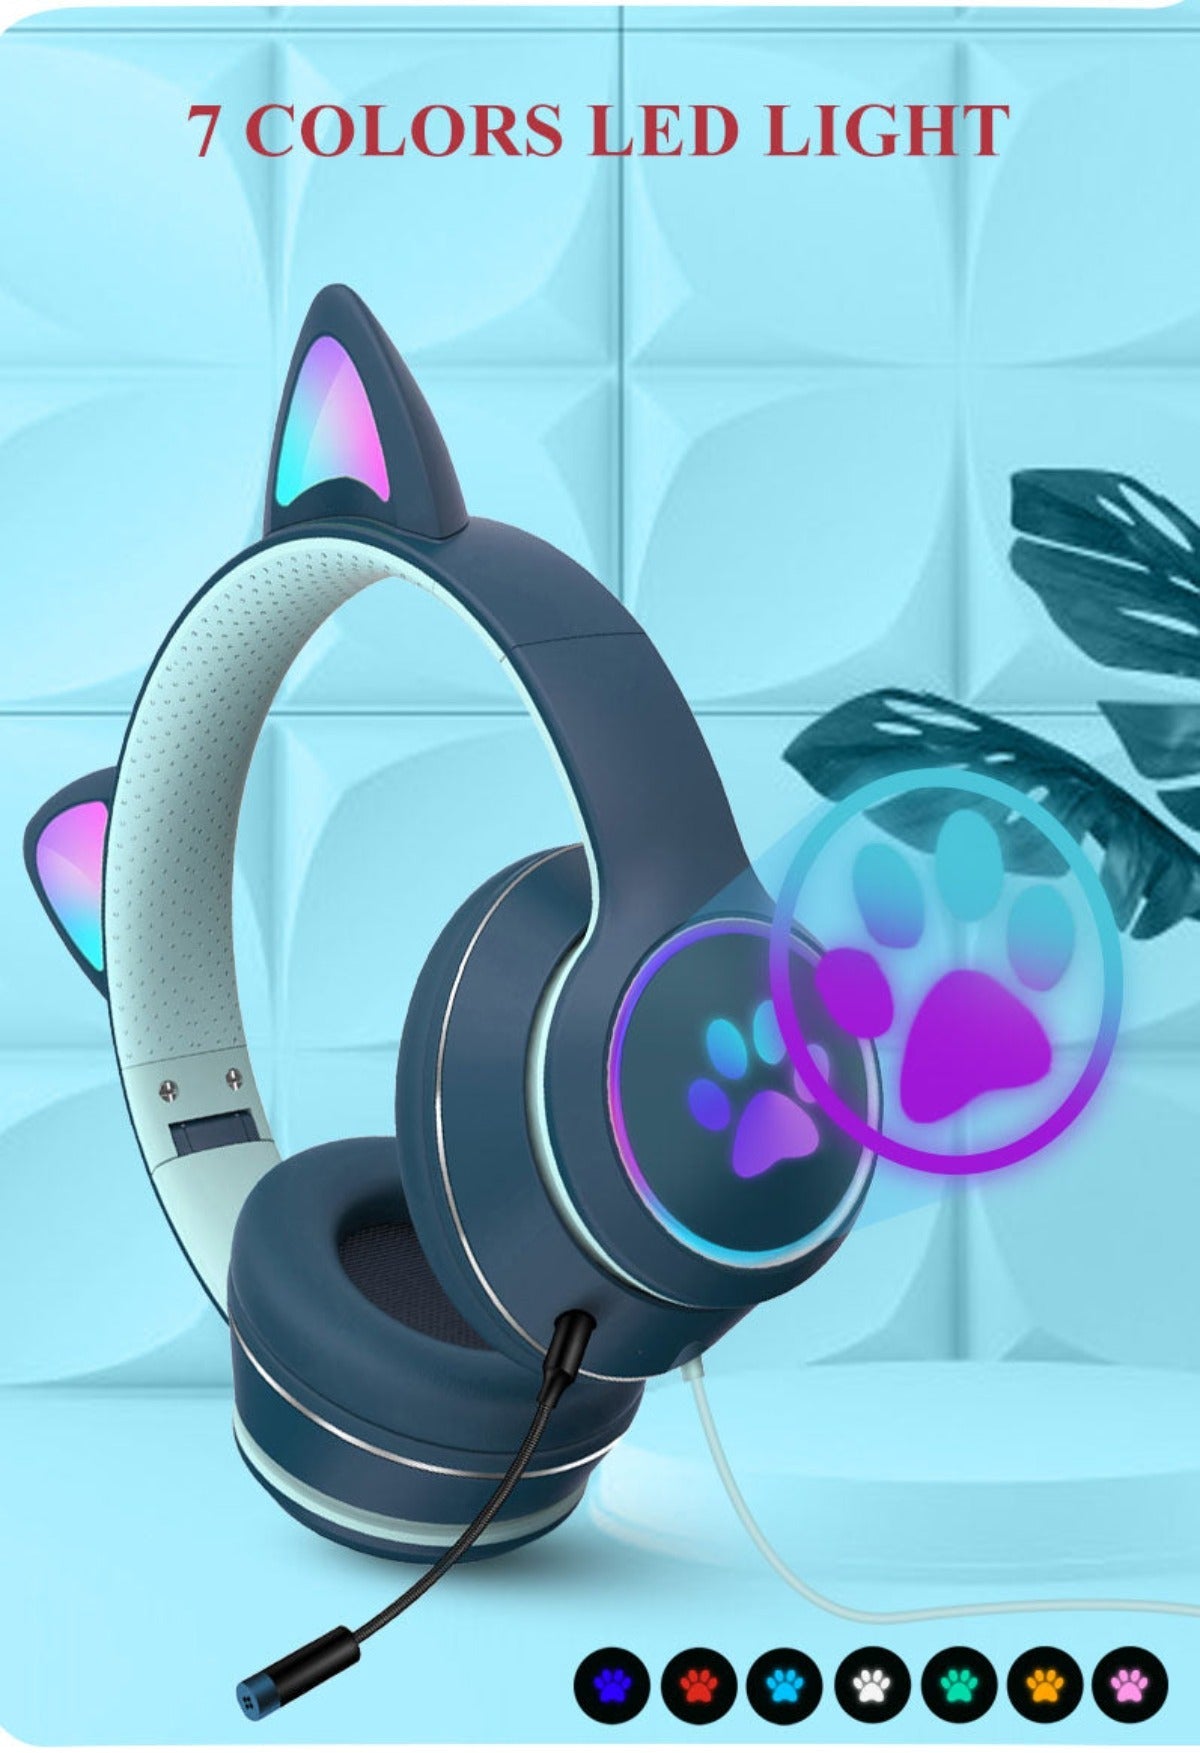 RGB Luminous Cat LED Gaming Headset - Multi-Platform Wired with Noise Reduction (Emerald Green)